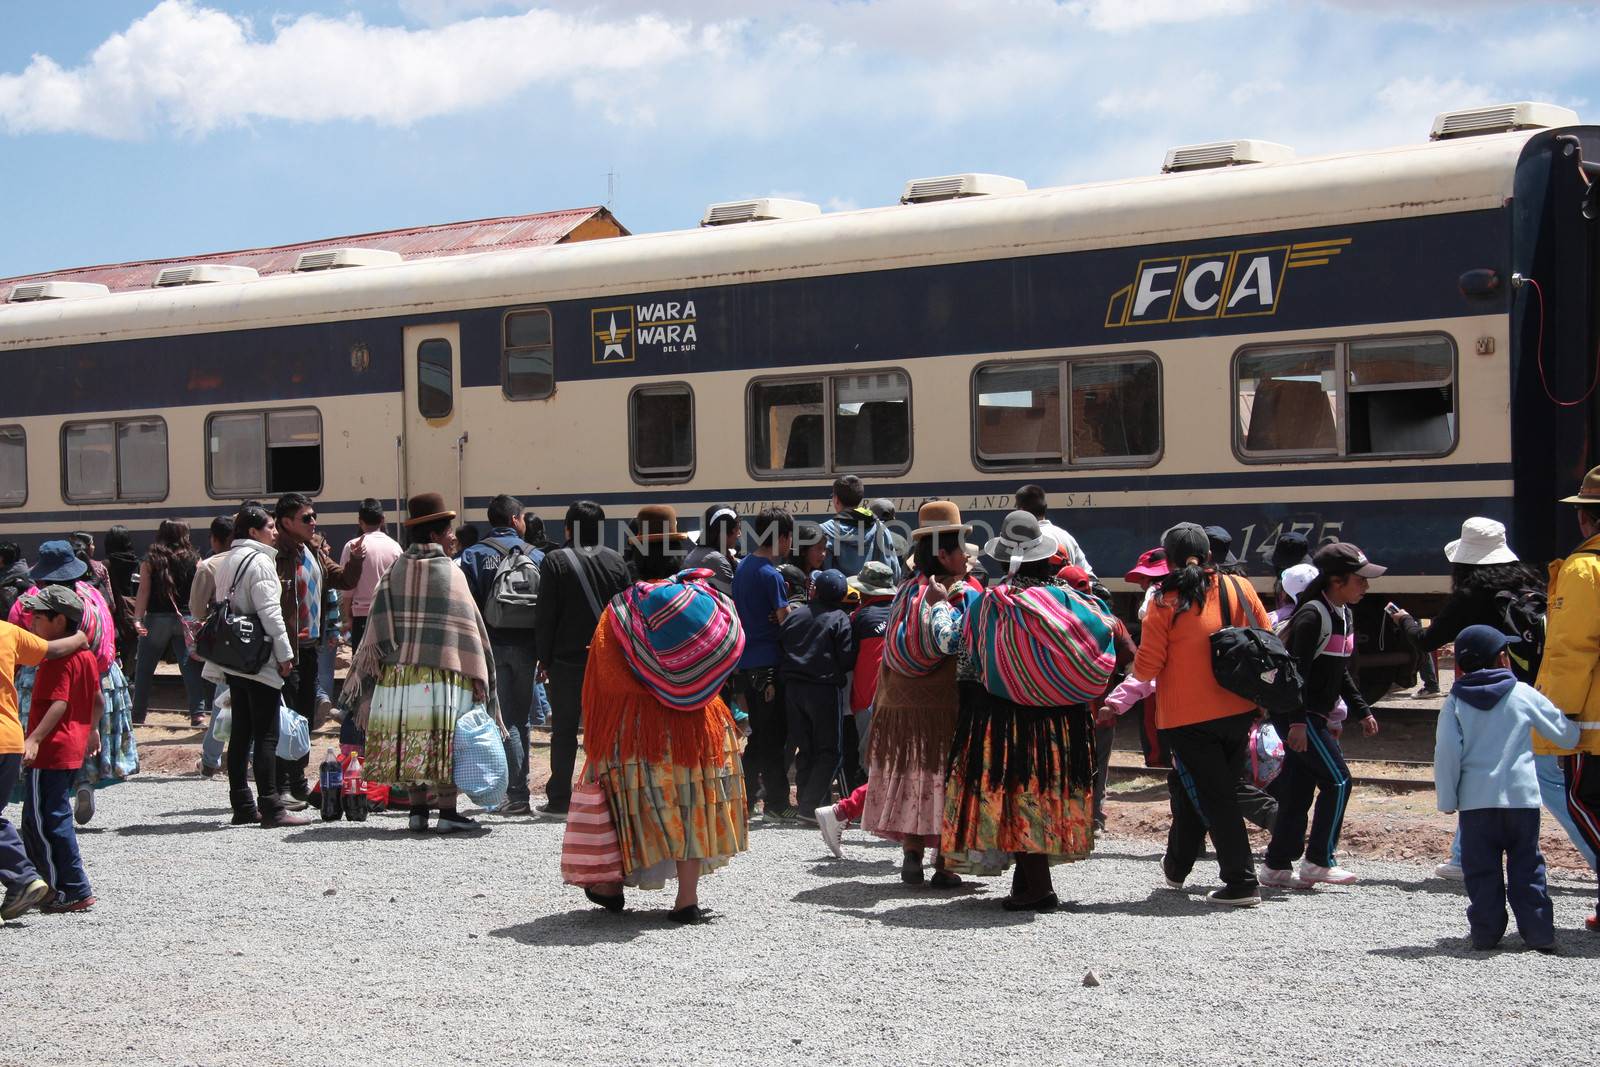 Crowd at the Tiwanaku Train station in Bolivia, South America